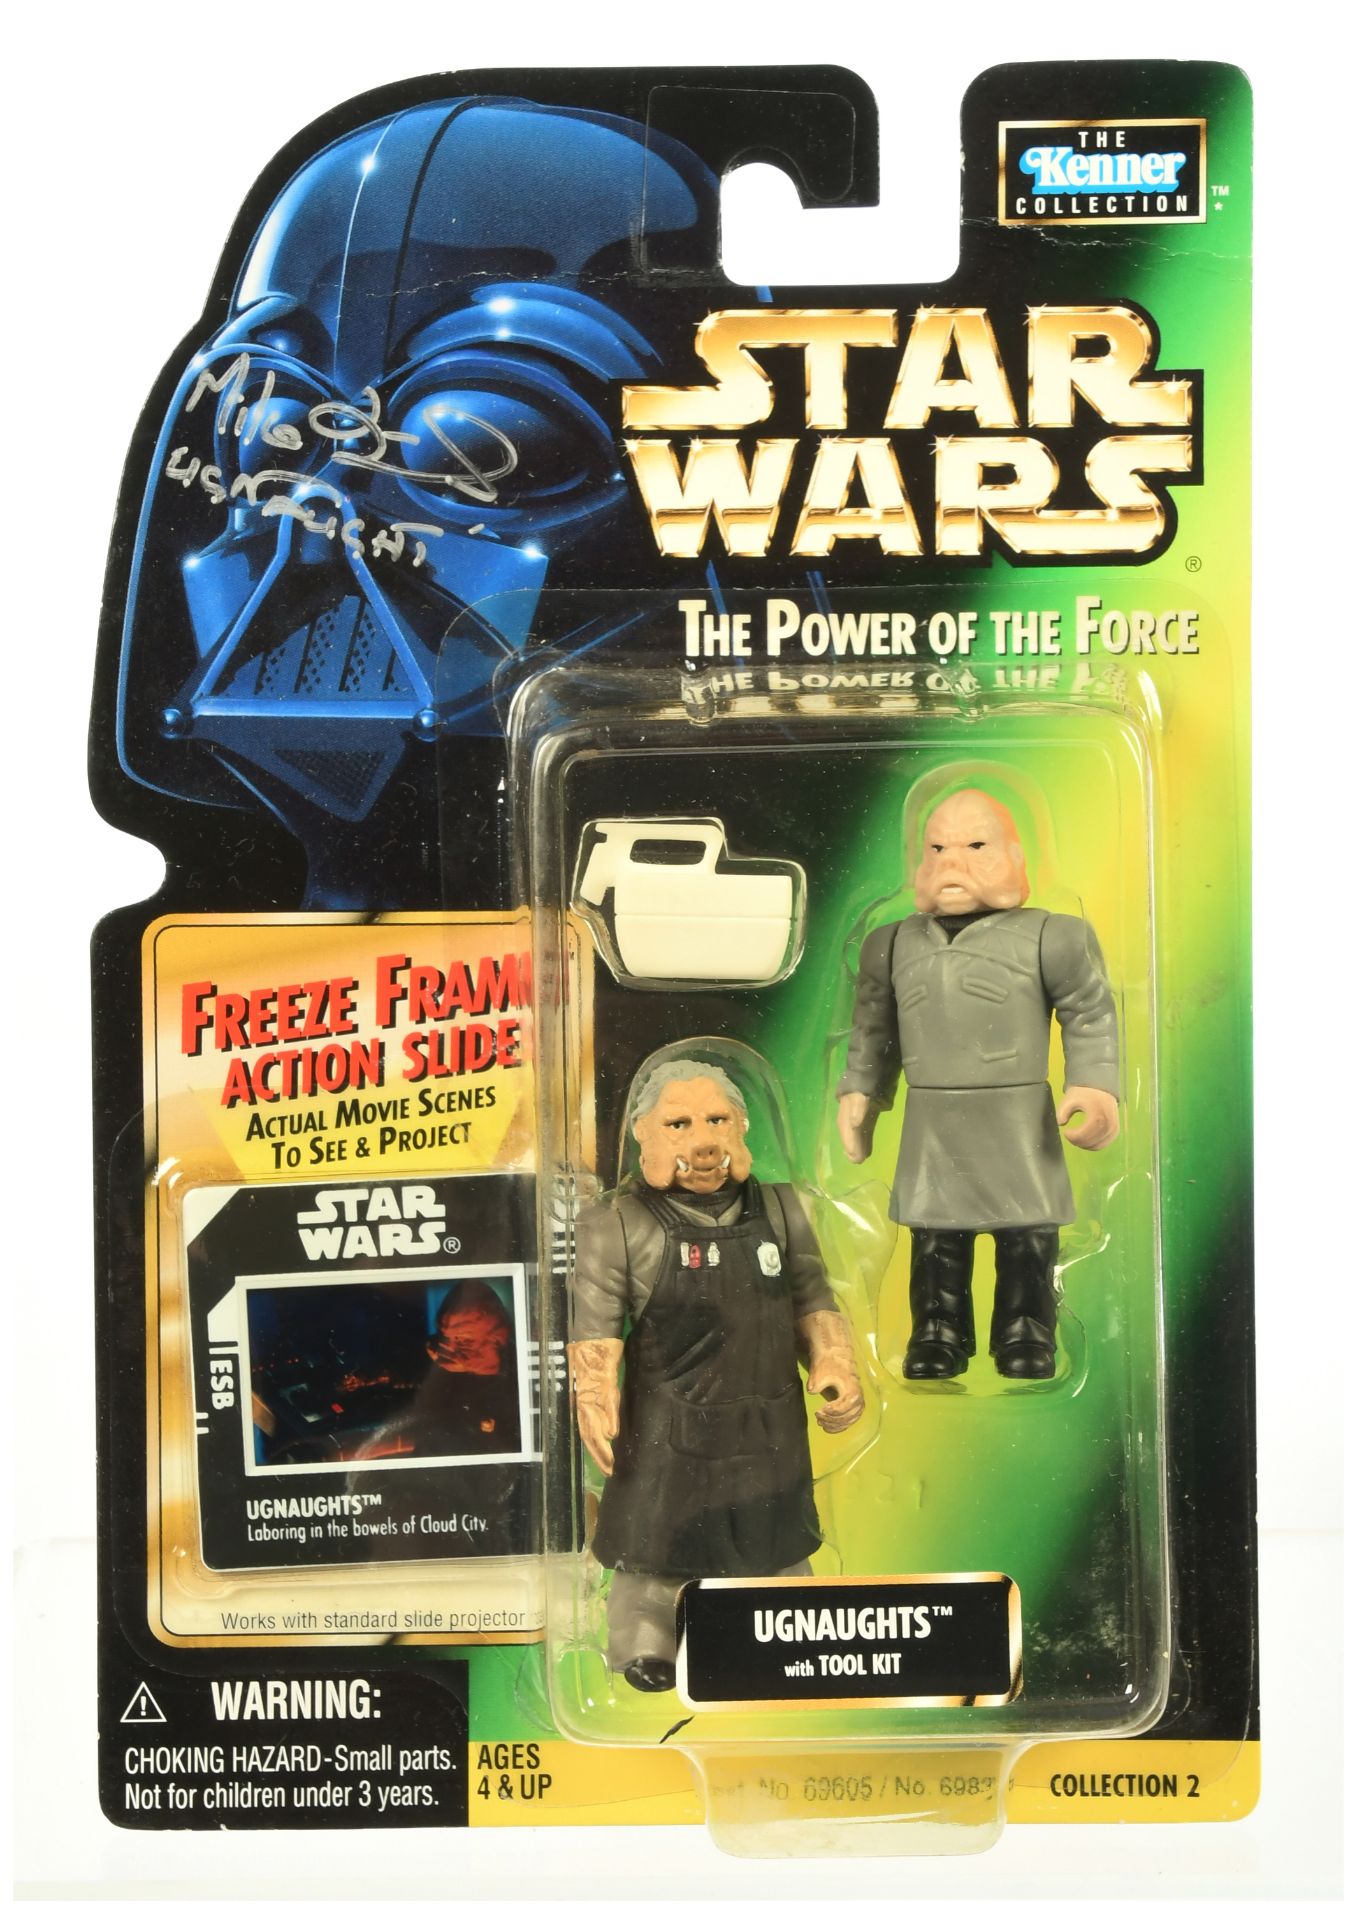 Kenner Star Wars The Power of the Force Green Freeze Frame card Ugnaughts 3 3/4" signed figure